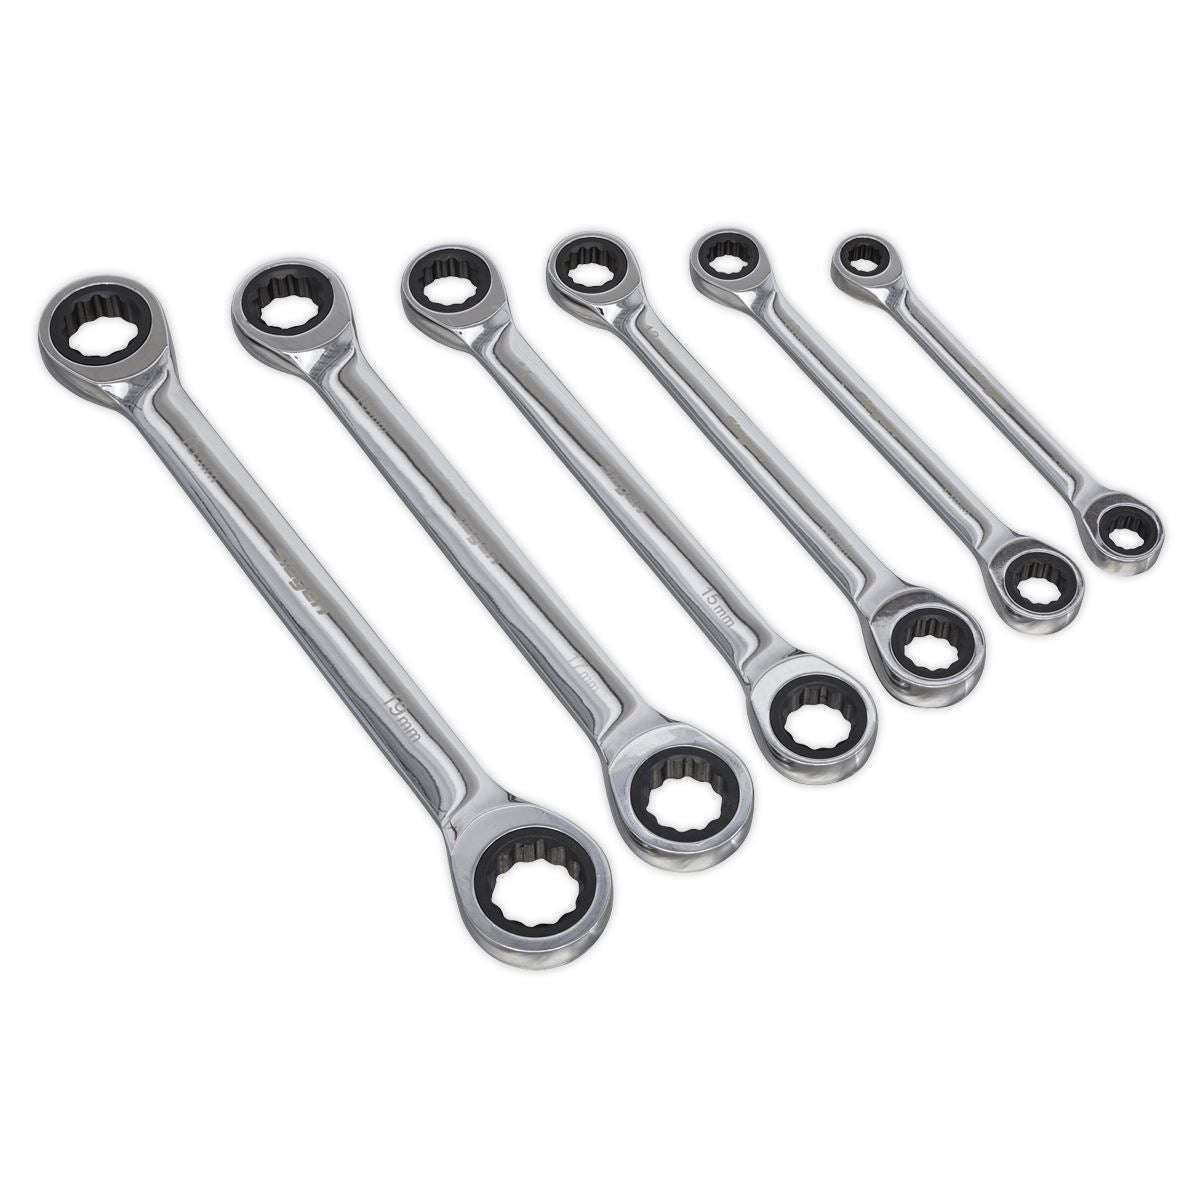 Siegen by Sealey Double End Ratchet Ring Spanner Set 6pc Metric